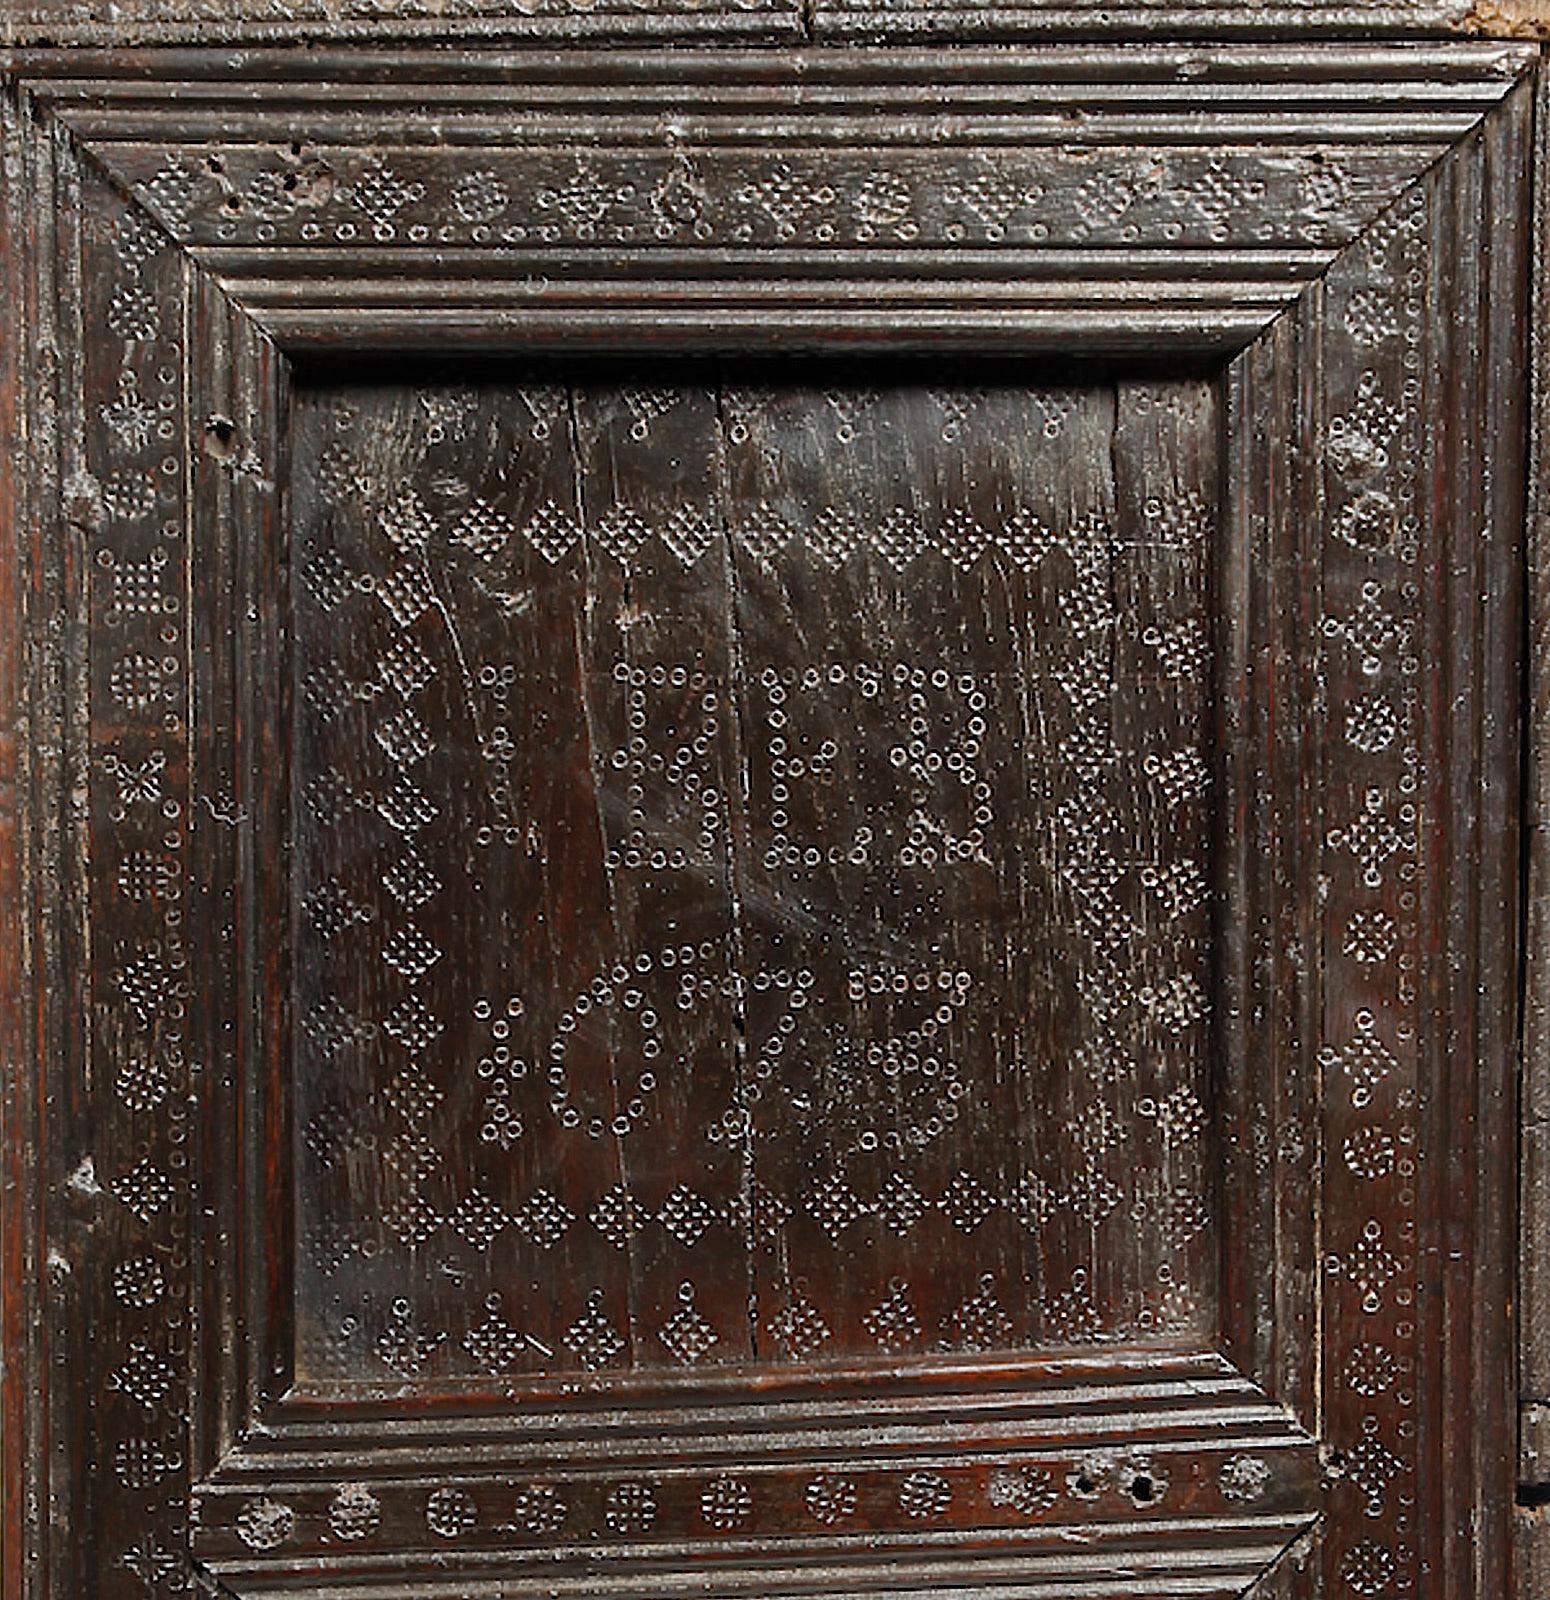 Carved Oak Wall Cupboard, Charles II period. English, Yorkshire, Dated 1673